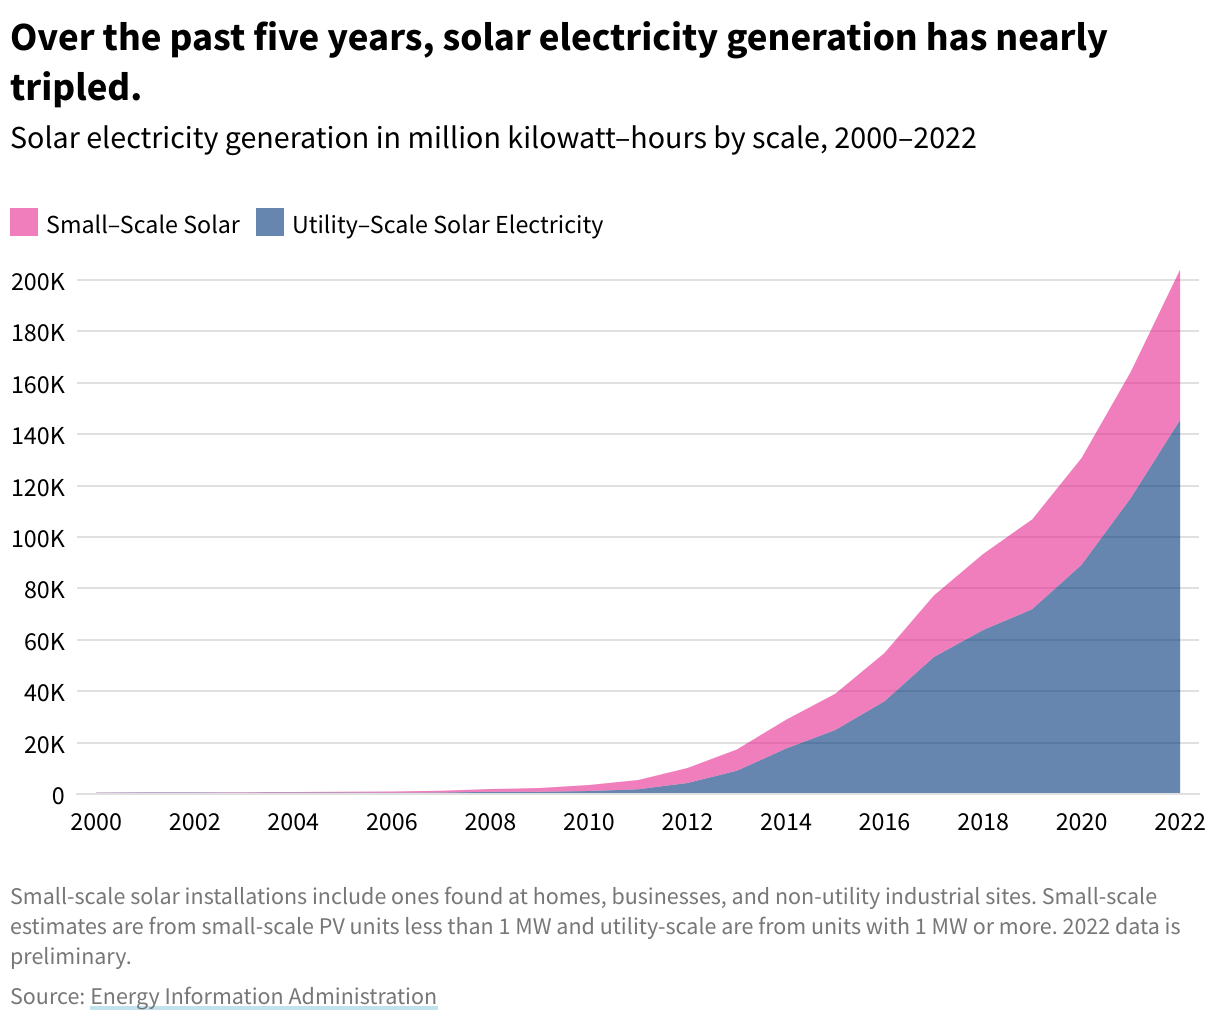 Area chart showing both small and utility scale electricity increasing exponentially. Over the past decade, utility-scale generation has increased at a slightly faster rate than small-scale.